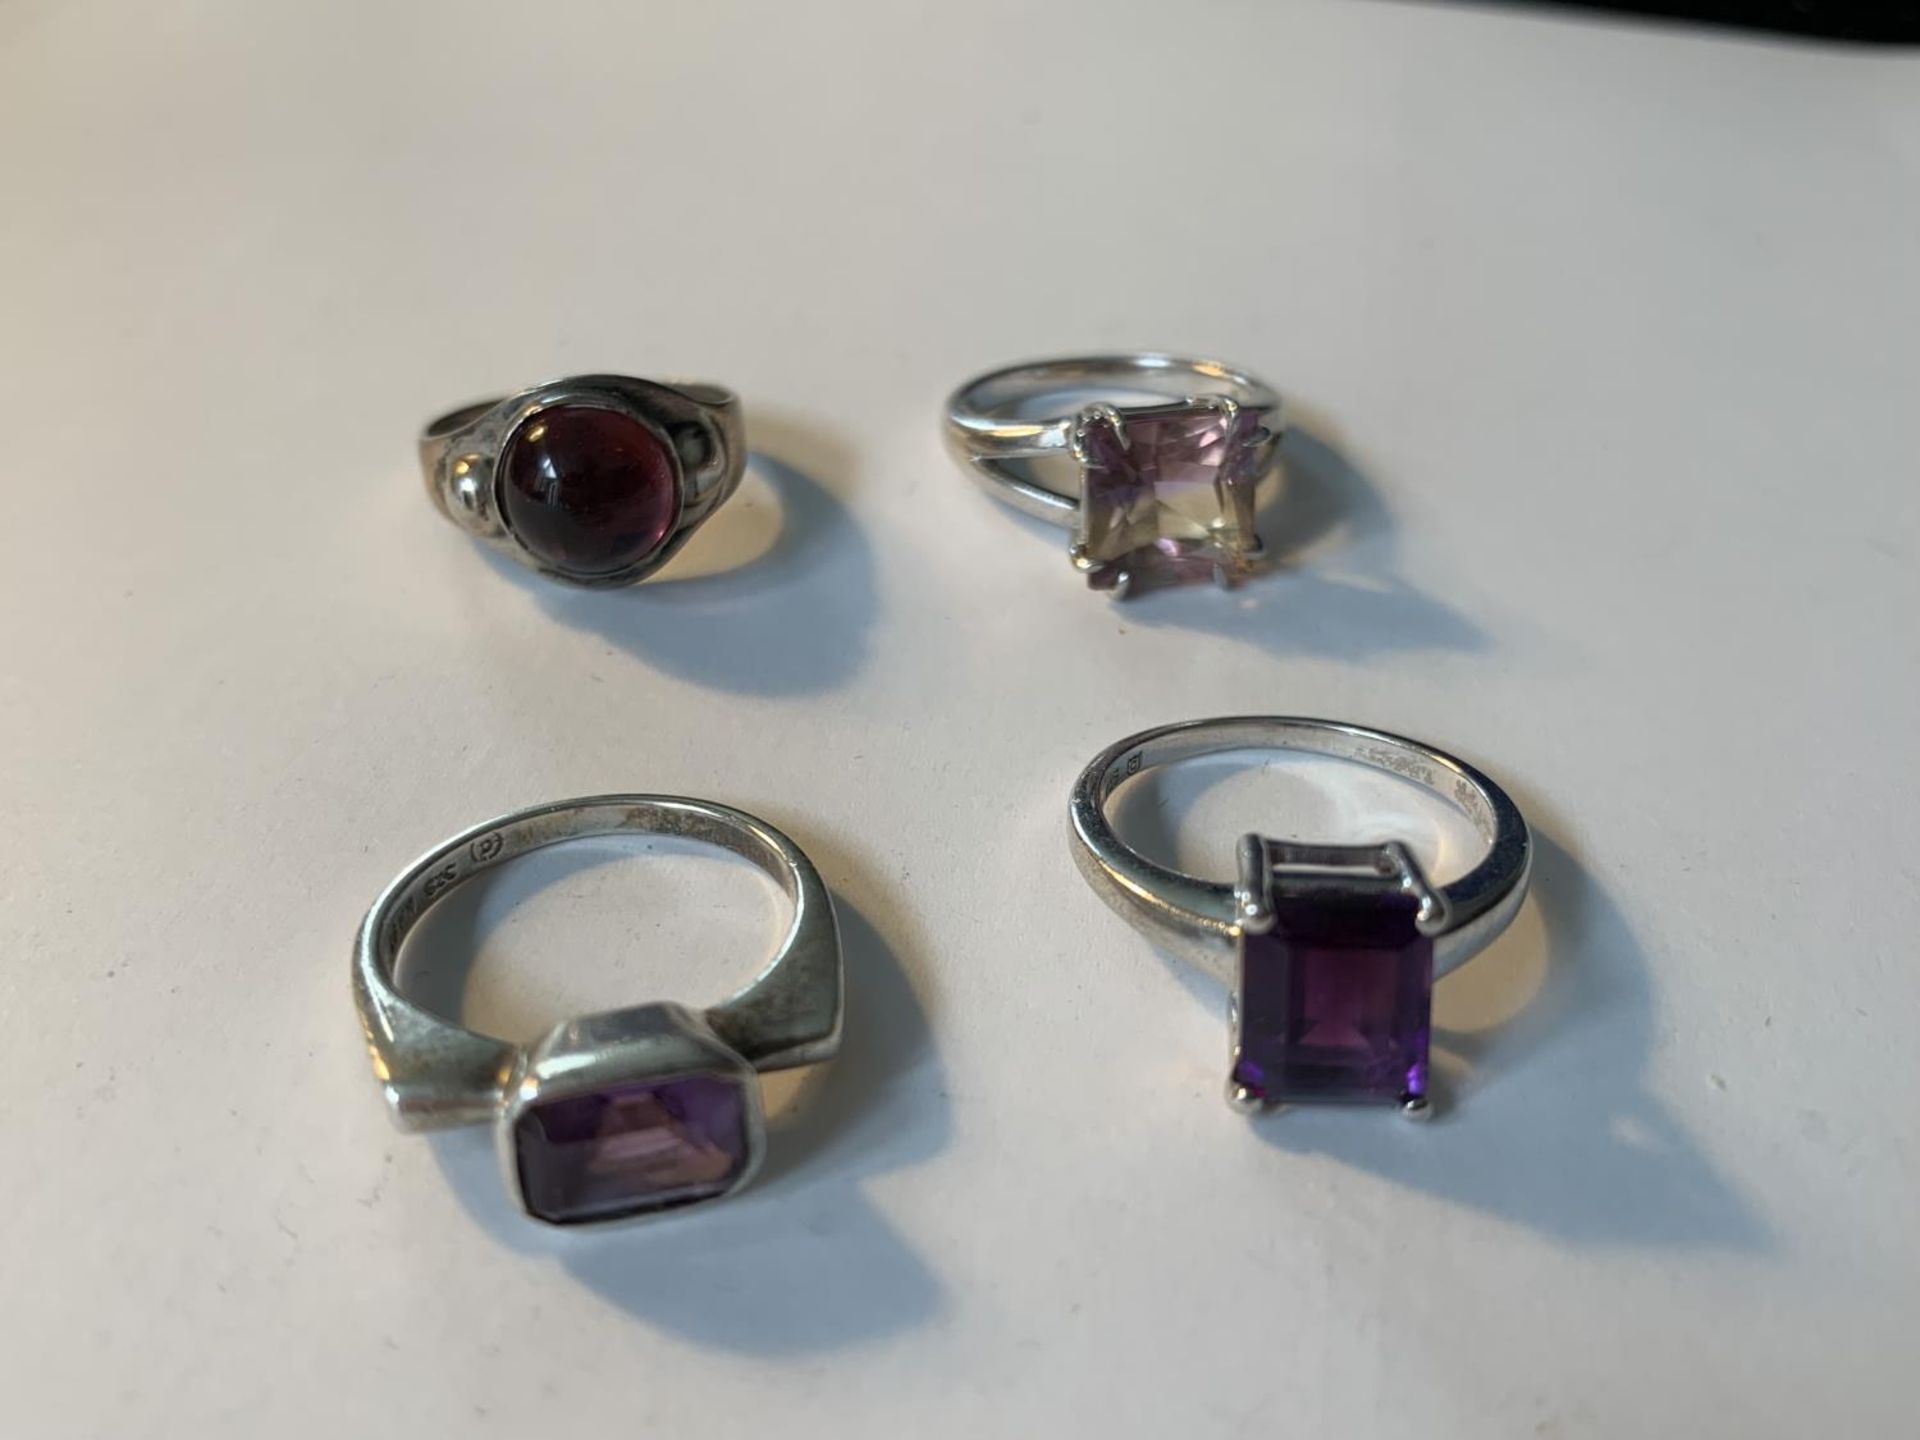 FOUR VARIOUS SILVER RINGS